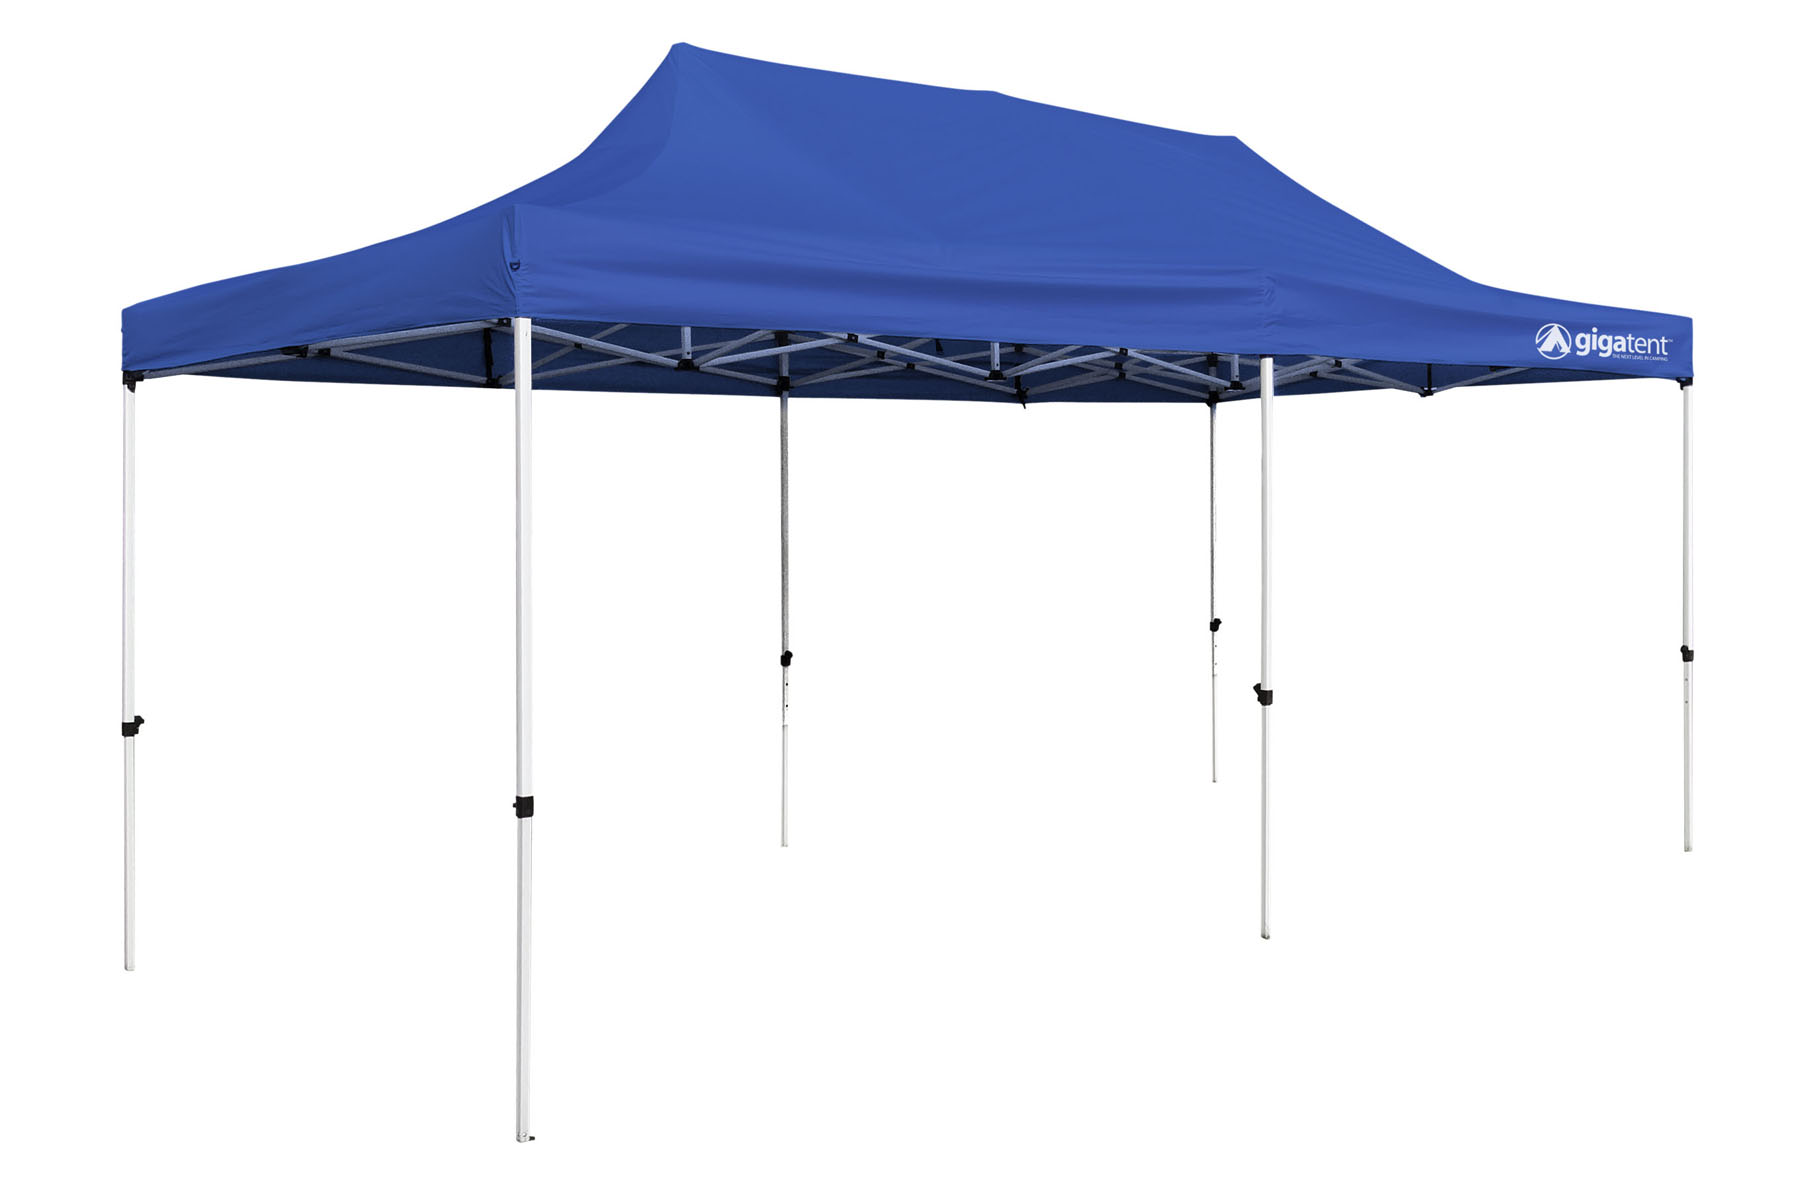 gigatent The Party Tent - Fitness & Sports - Outdoor Activities ...